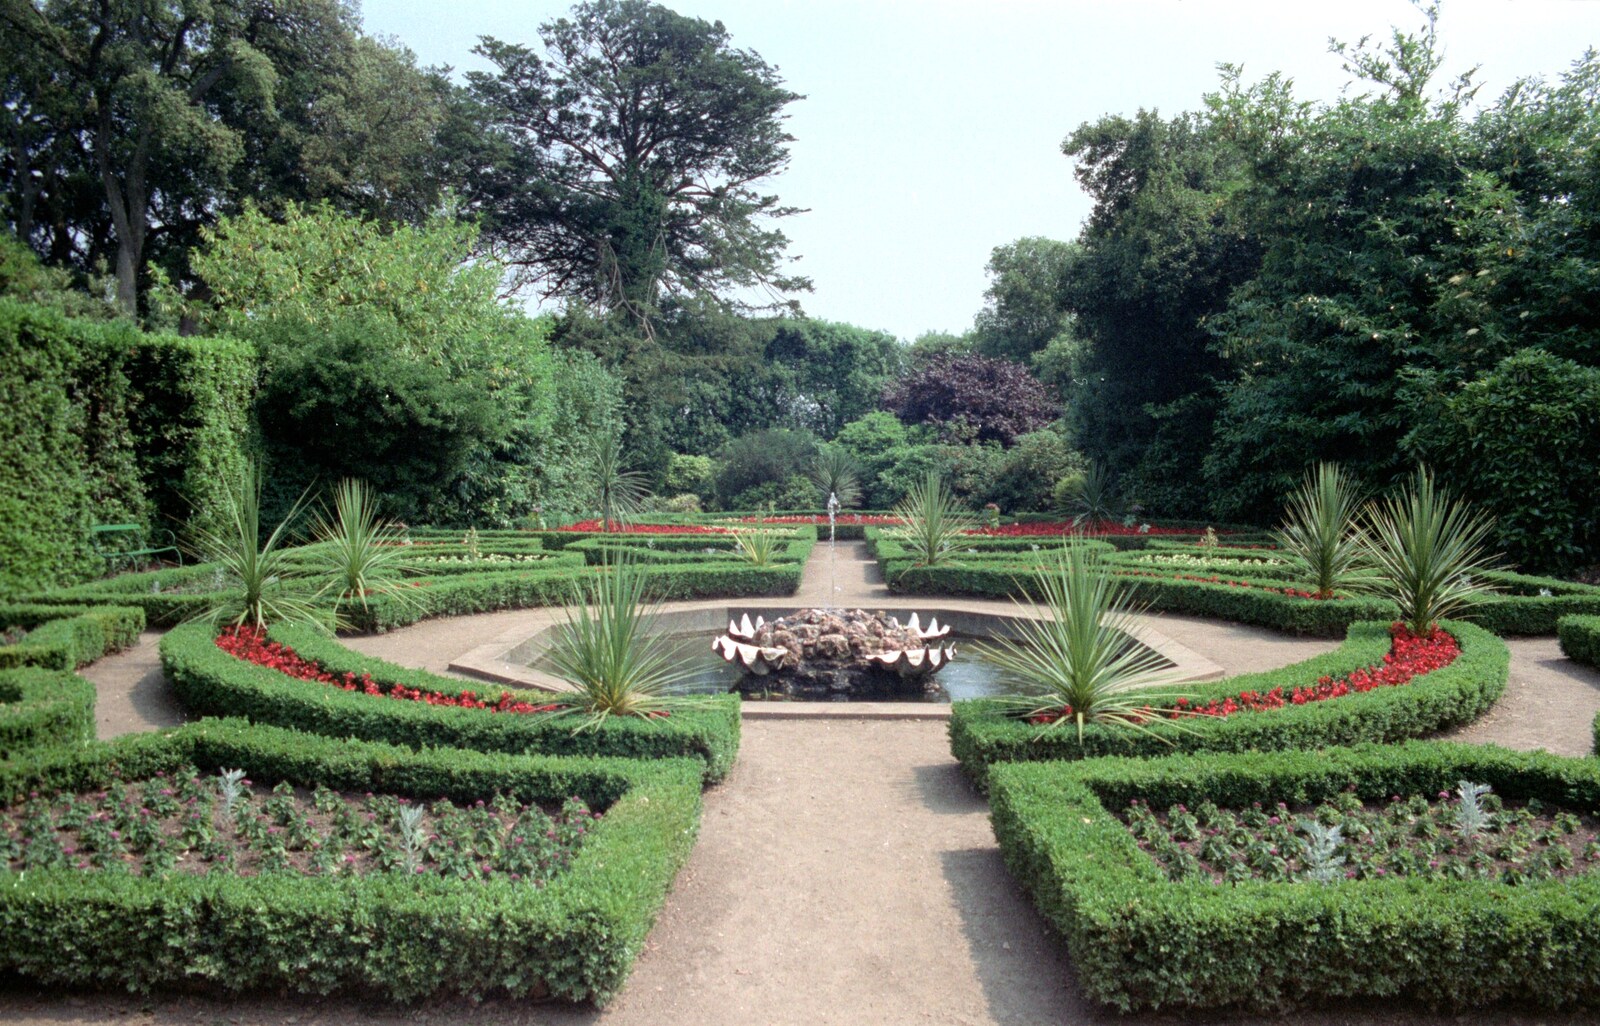 Mount Edgcumbe gardens from Uni: A Trip to Mount Edgcumbe, Cornwall - 17th June 1989